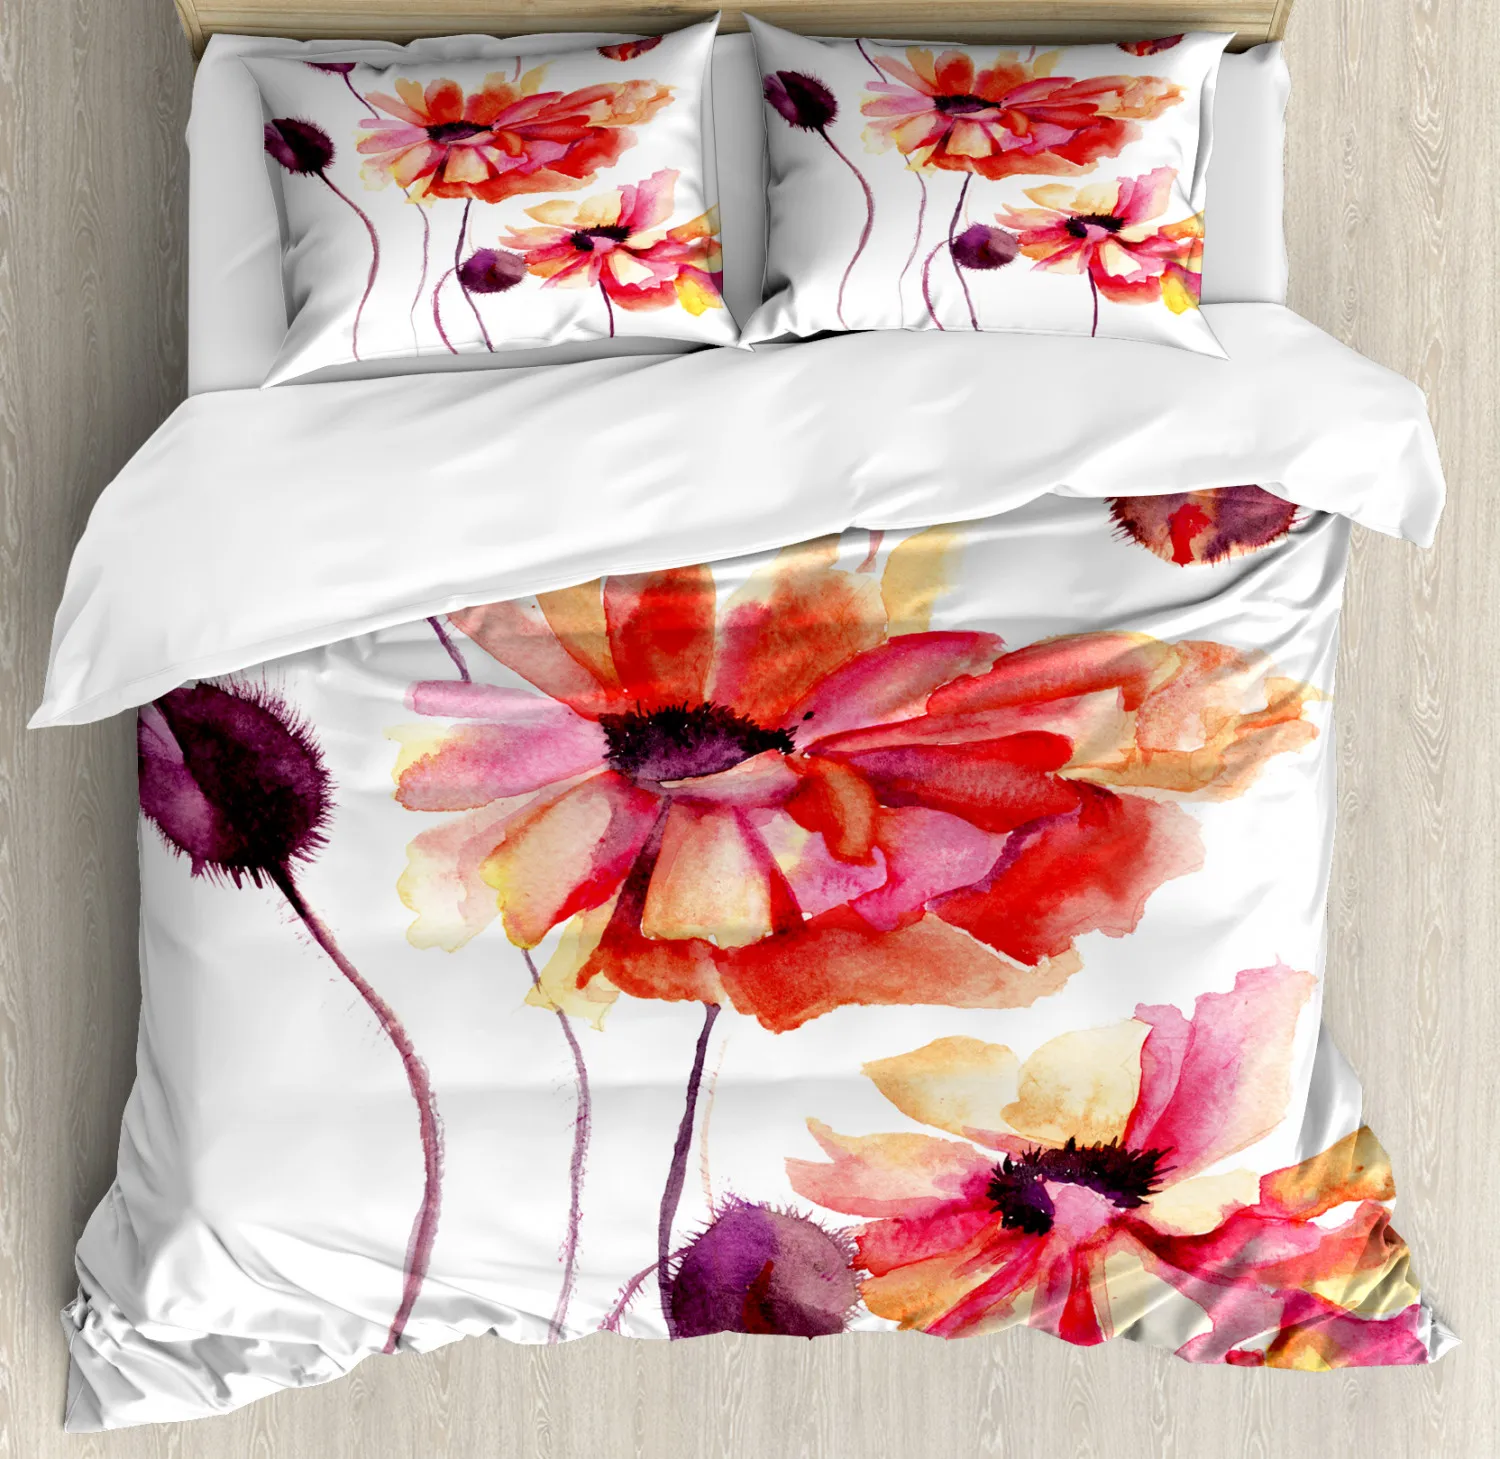 

Watercolor Flower Duvet Cover King Queen Poppies Nature Buds White Scarlet Quilt Cover Floral Polyester Bedding Set Wildflower